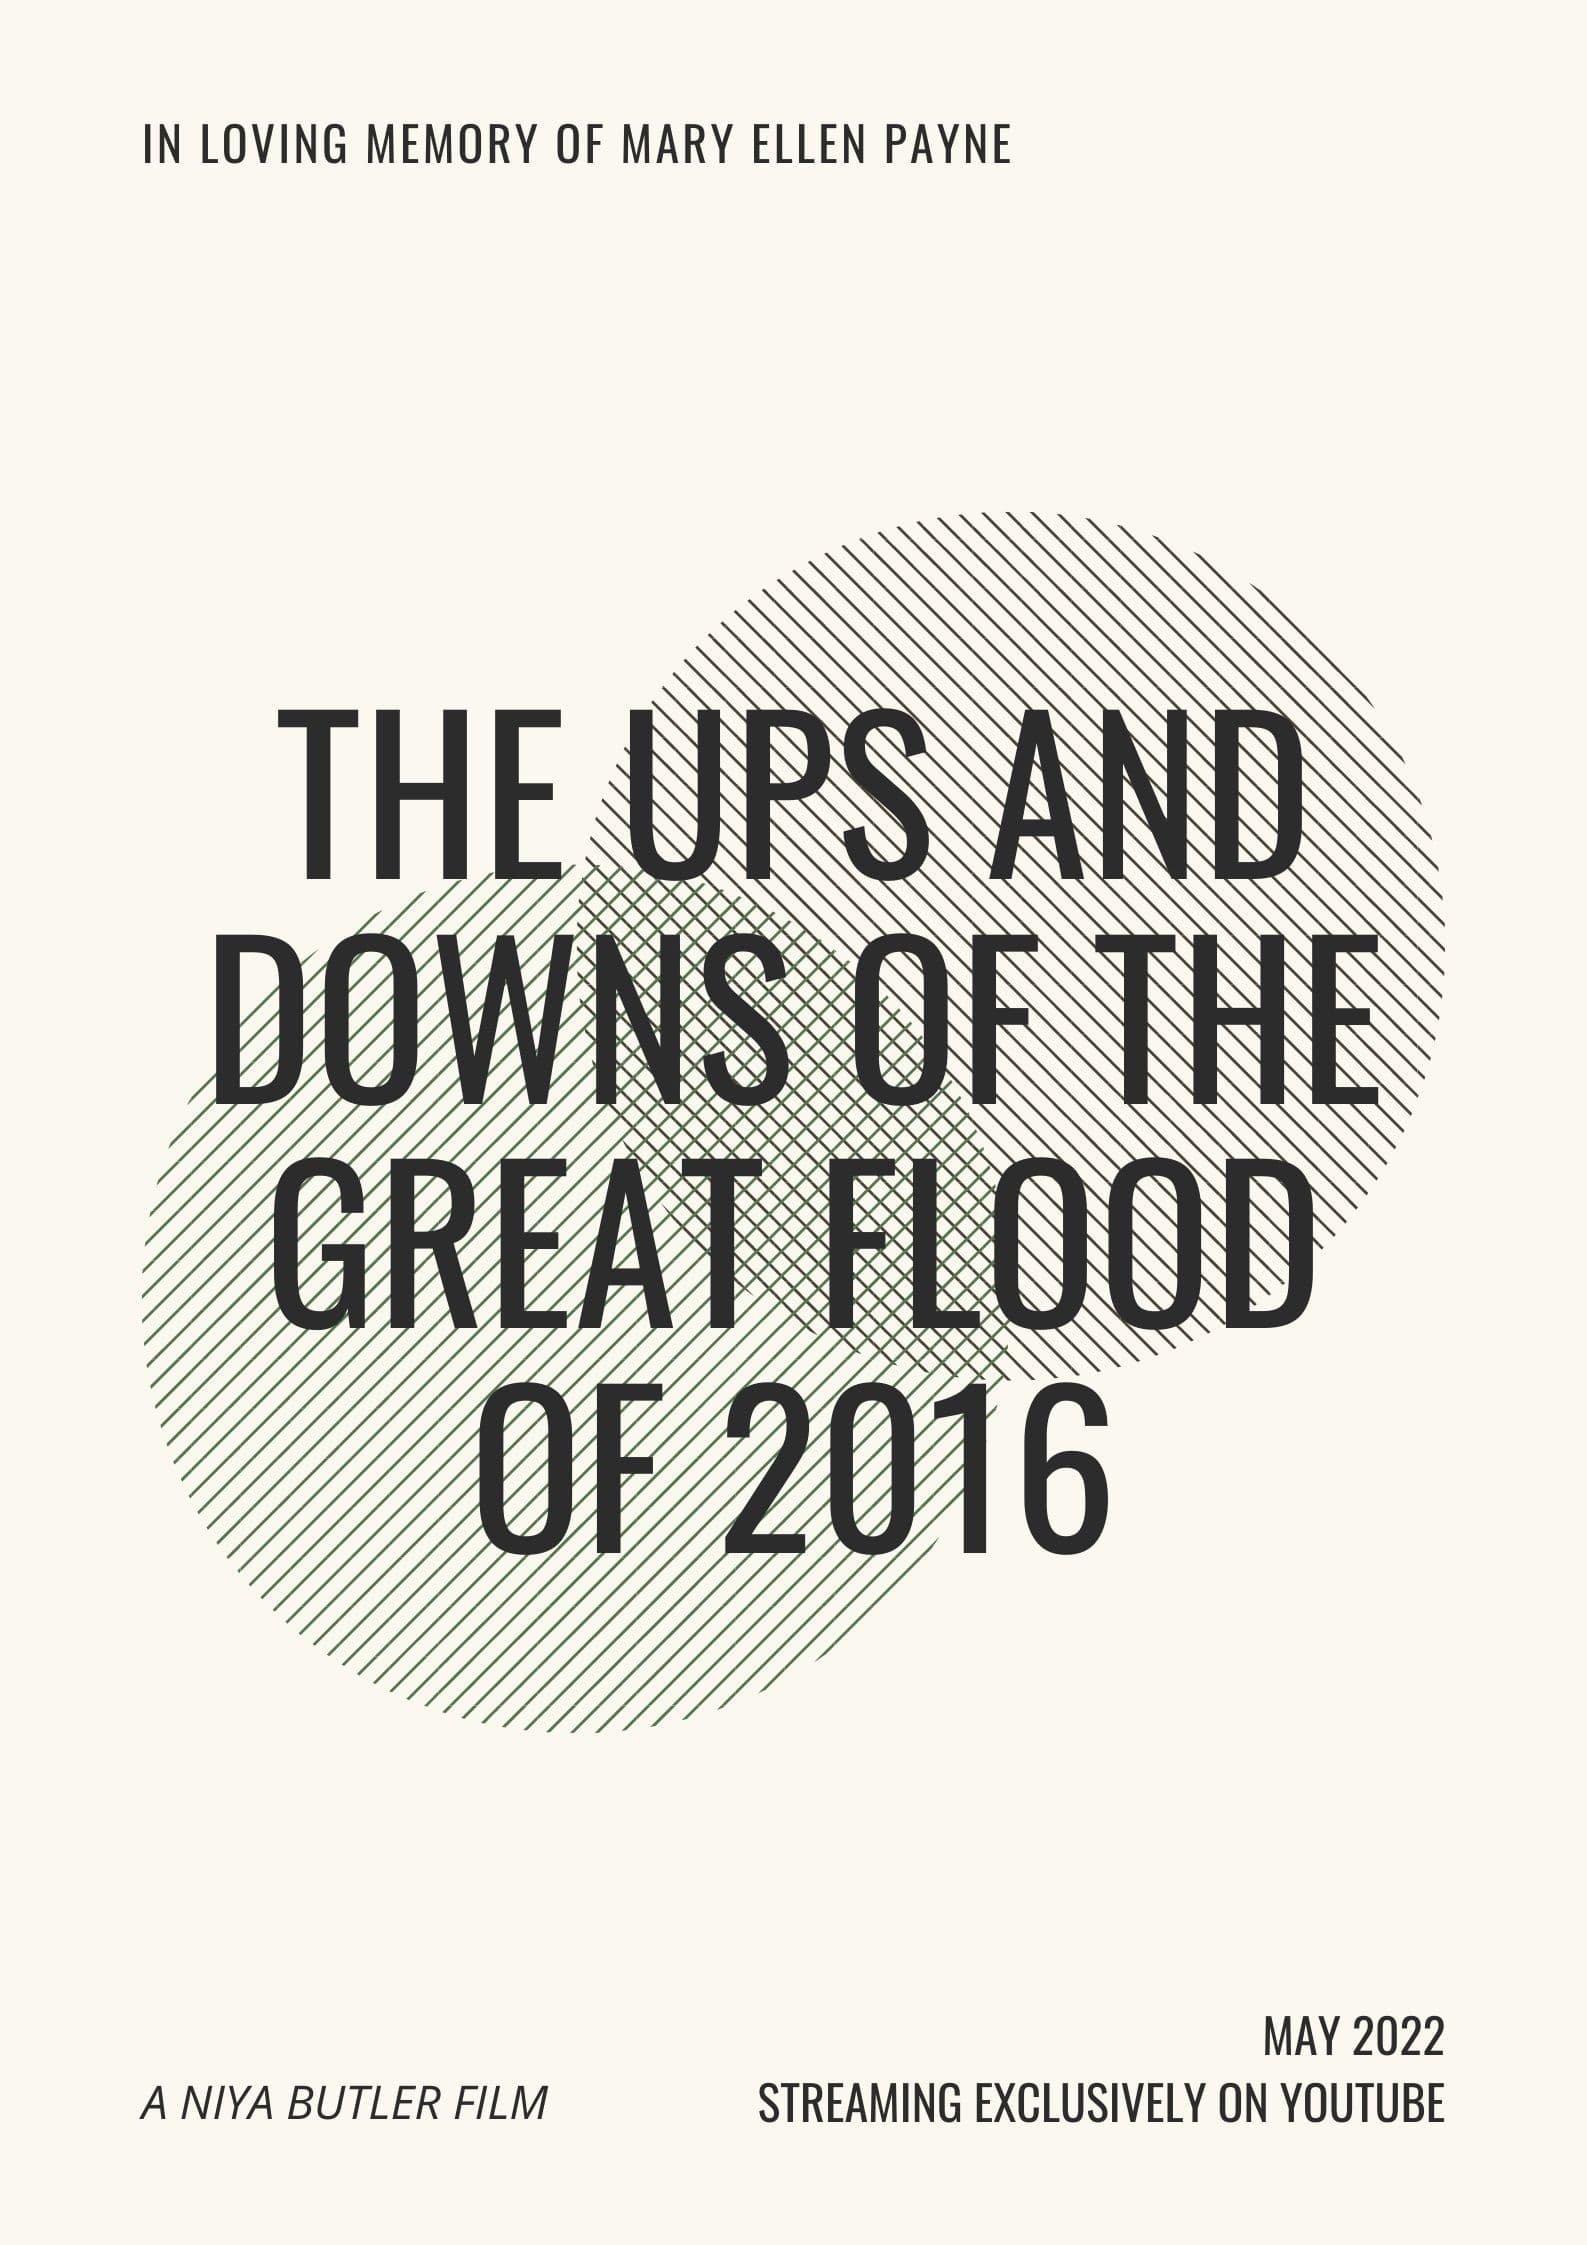 The Ups and Downs of the Great Flood of 2016